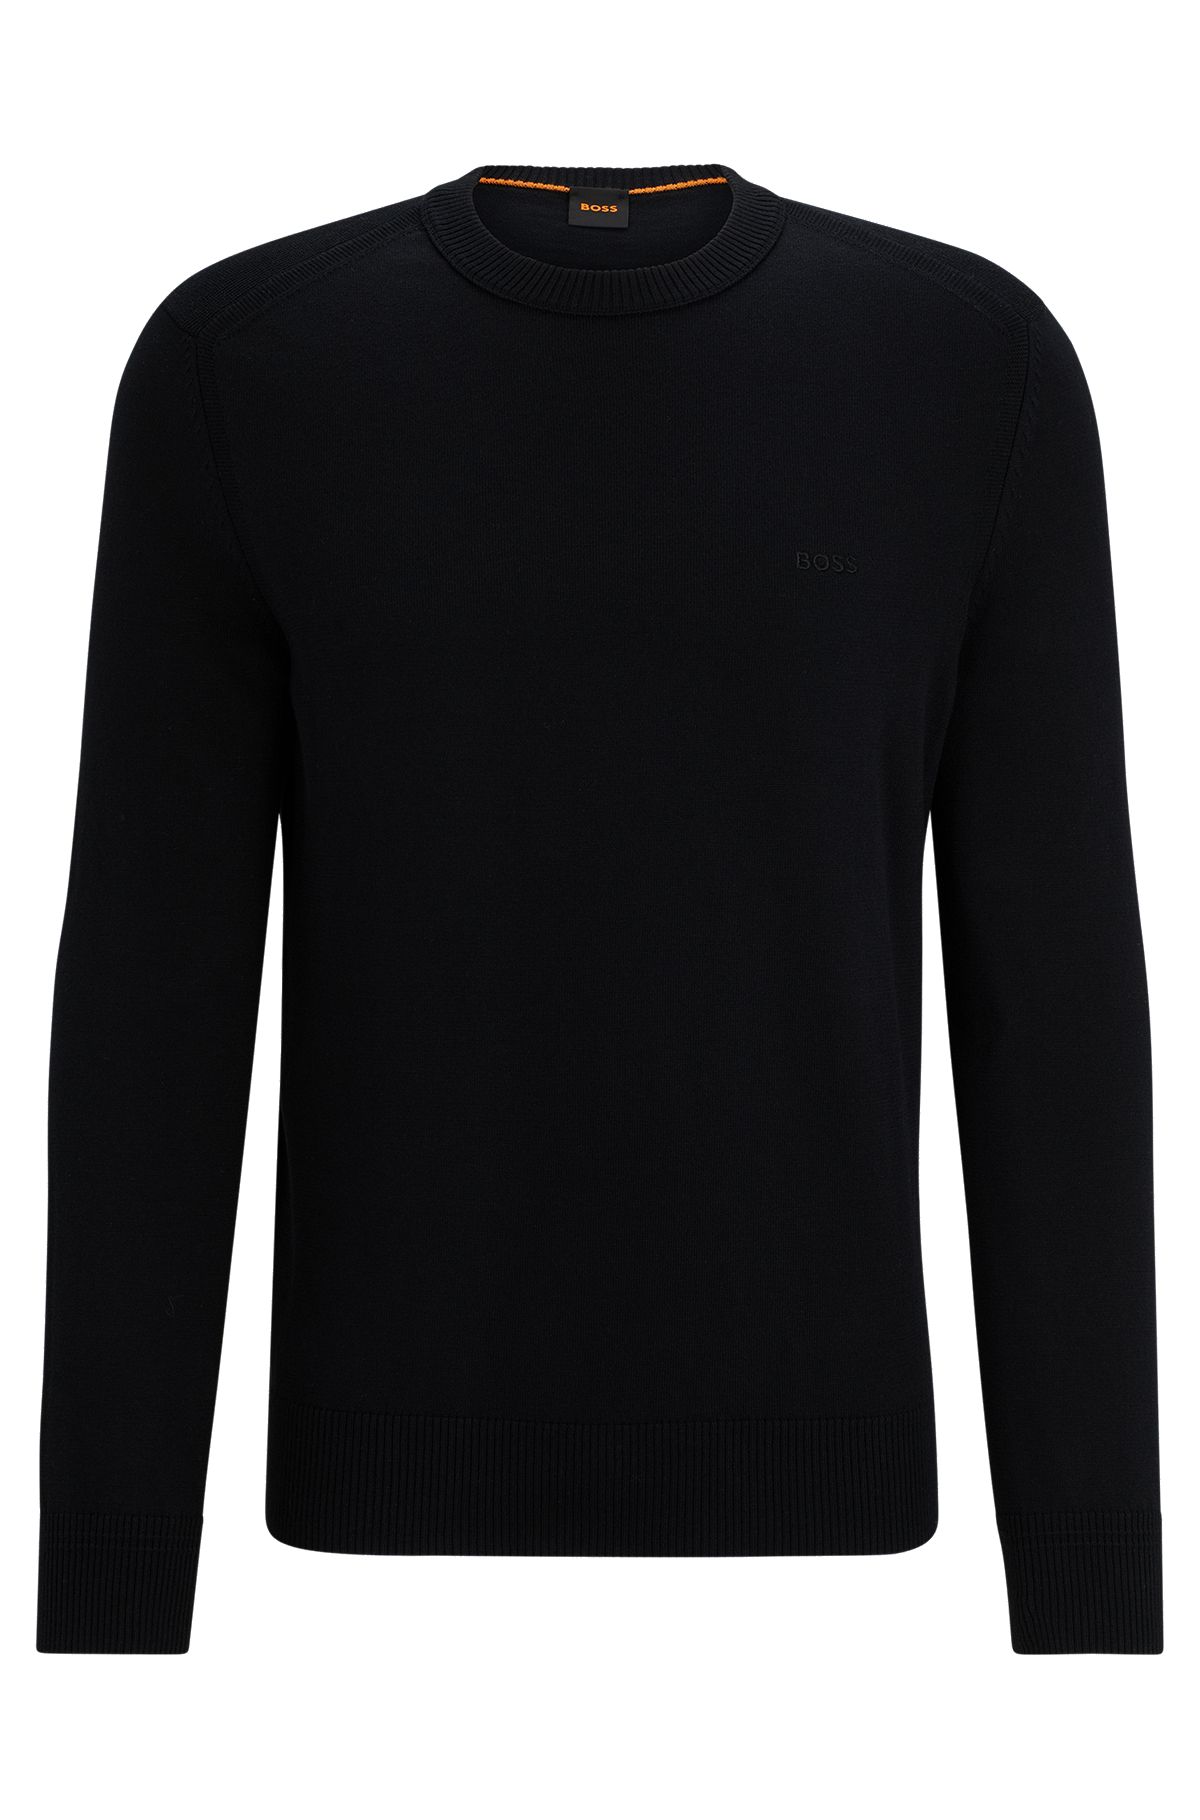 Cotton-jersey regular-fit sweatshirt with embroidered logo, Black